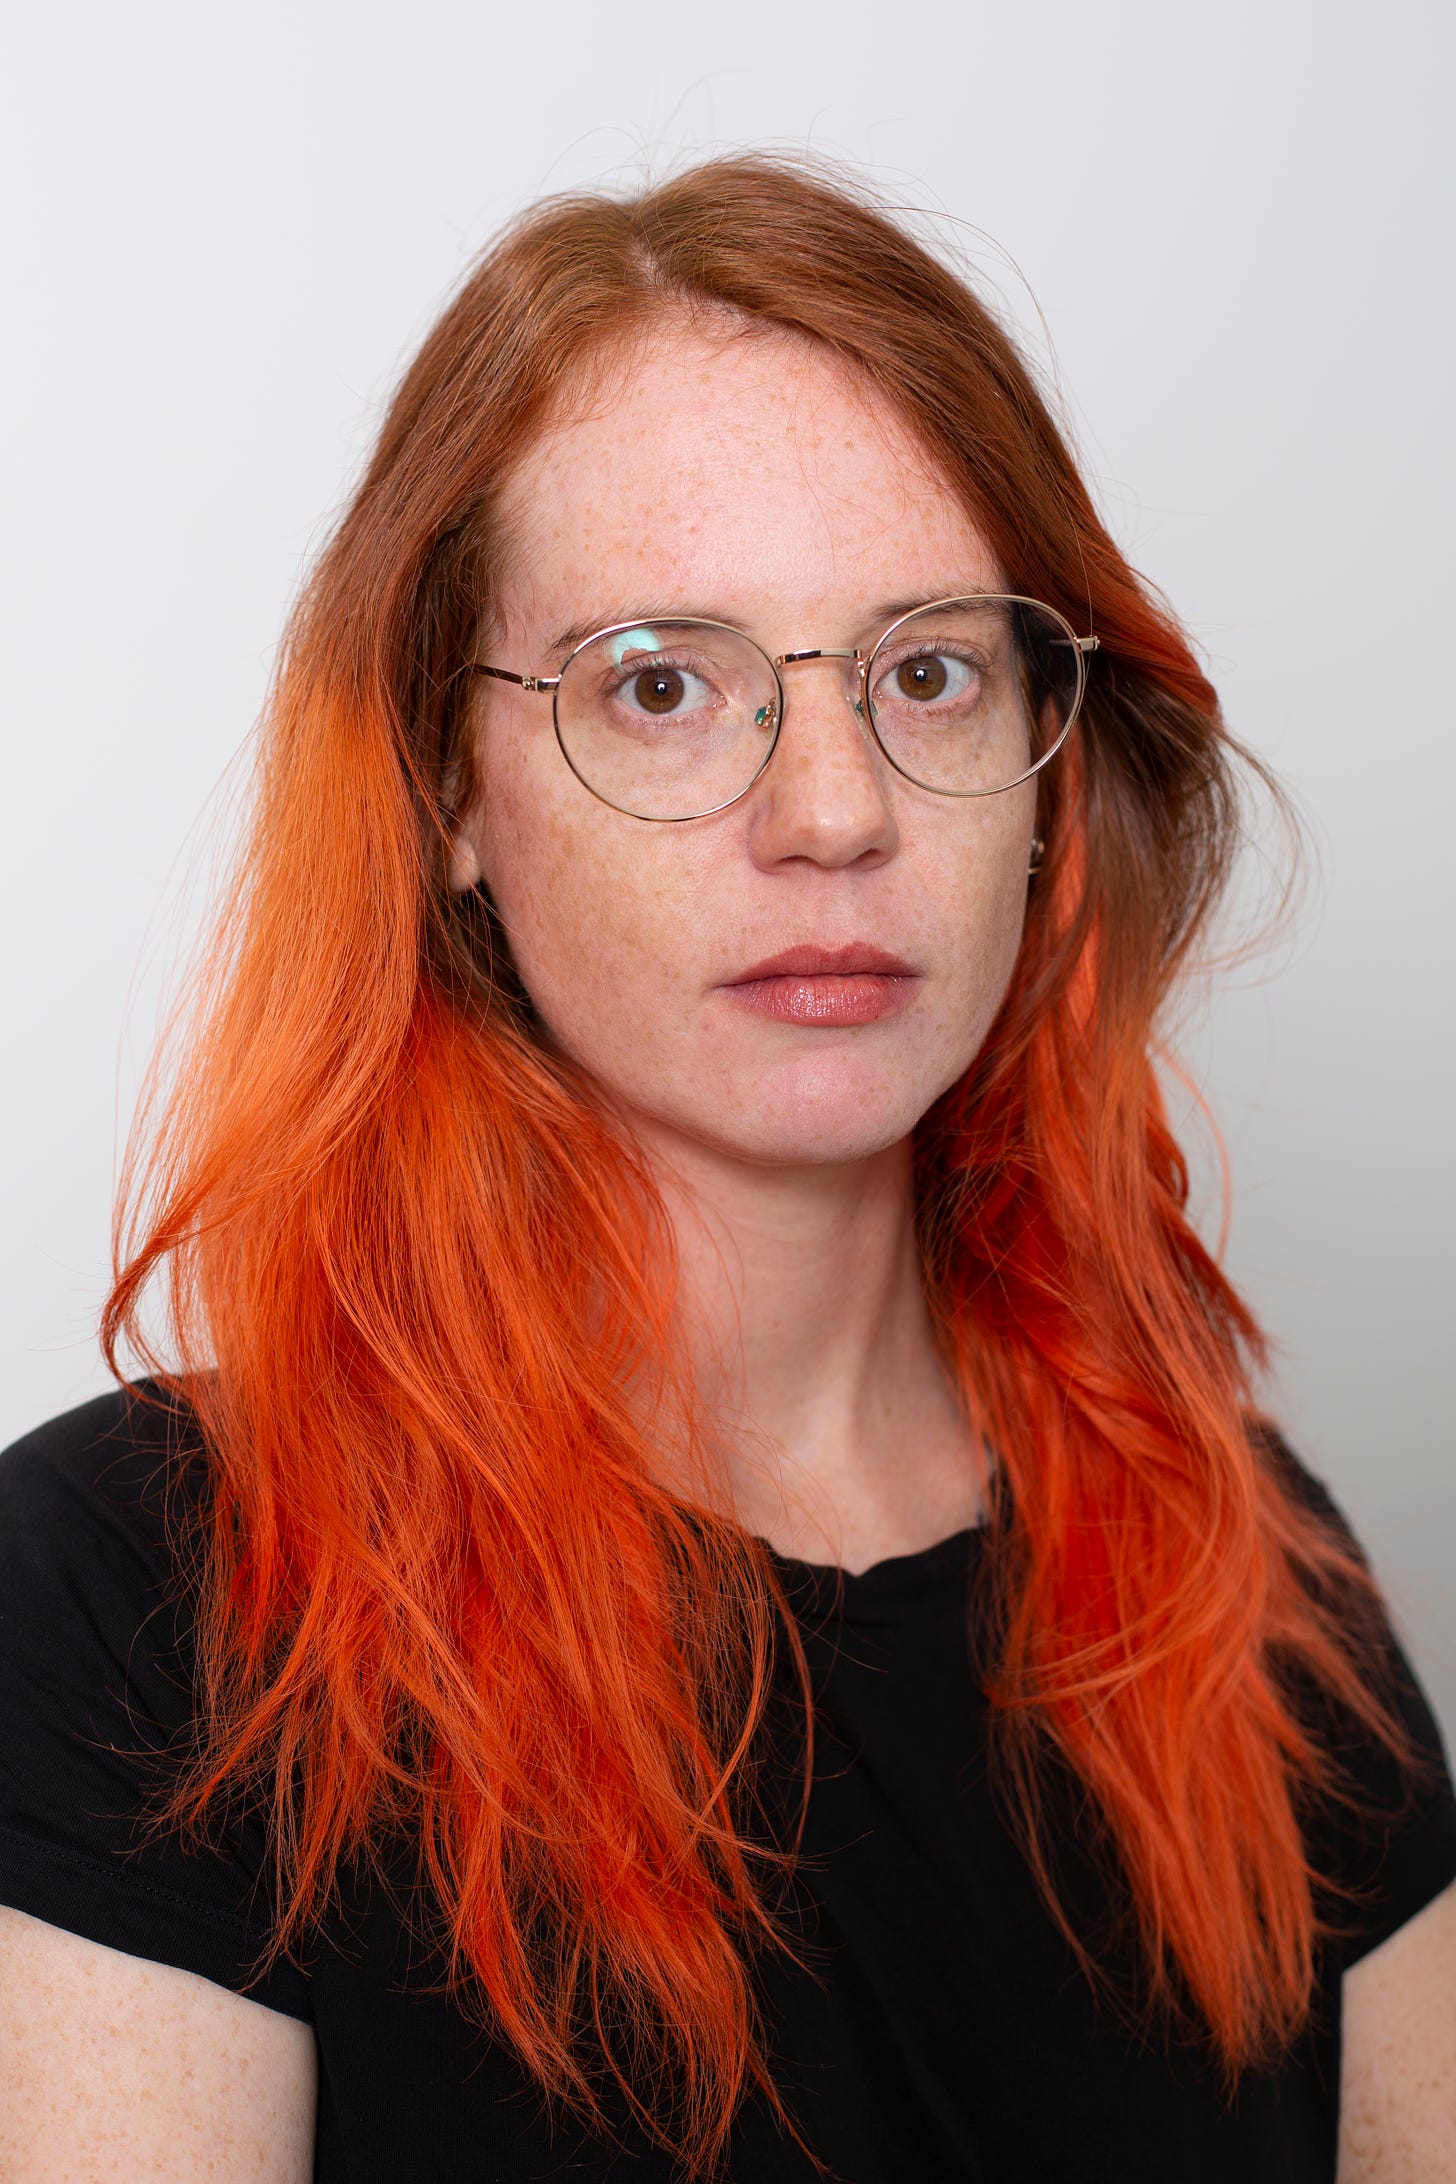 Photo of Beatrice Adler-Bolton, portrait of a white woman with natural red to dyed orange long wavy hair and freckles, wearing gold round-rimmed glasses and a black t shirt in front of a white background.